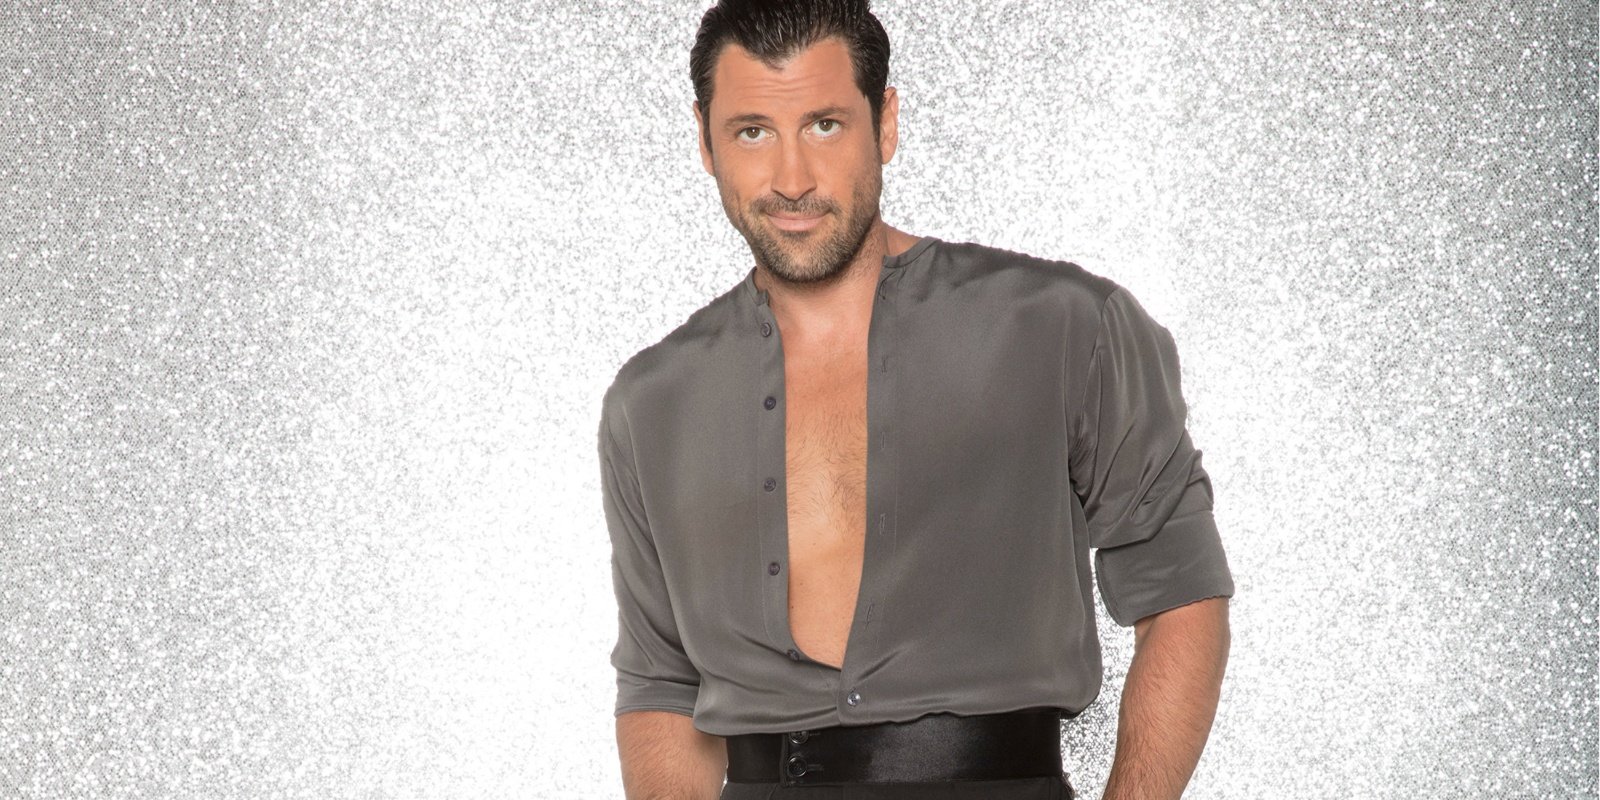 Former 'DWTS' pro Maksim Chmerkovskiy claims there is often 'sexual energy' between pros and celebrities.